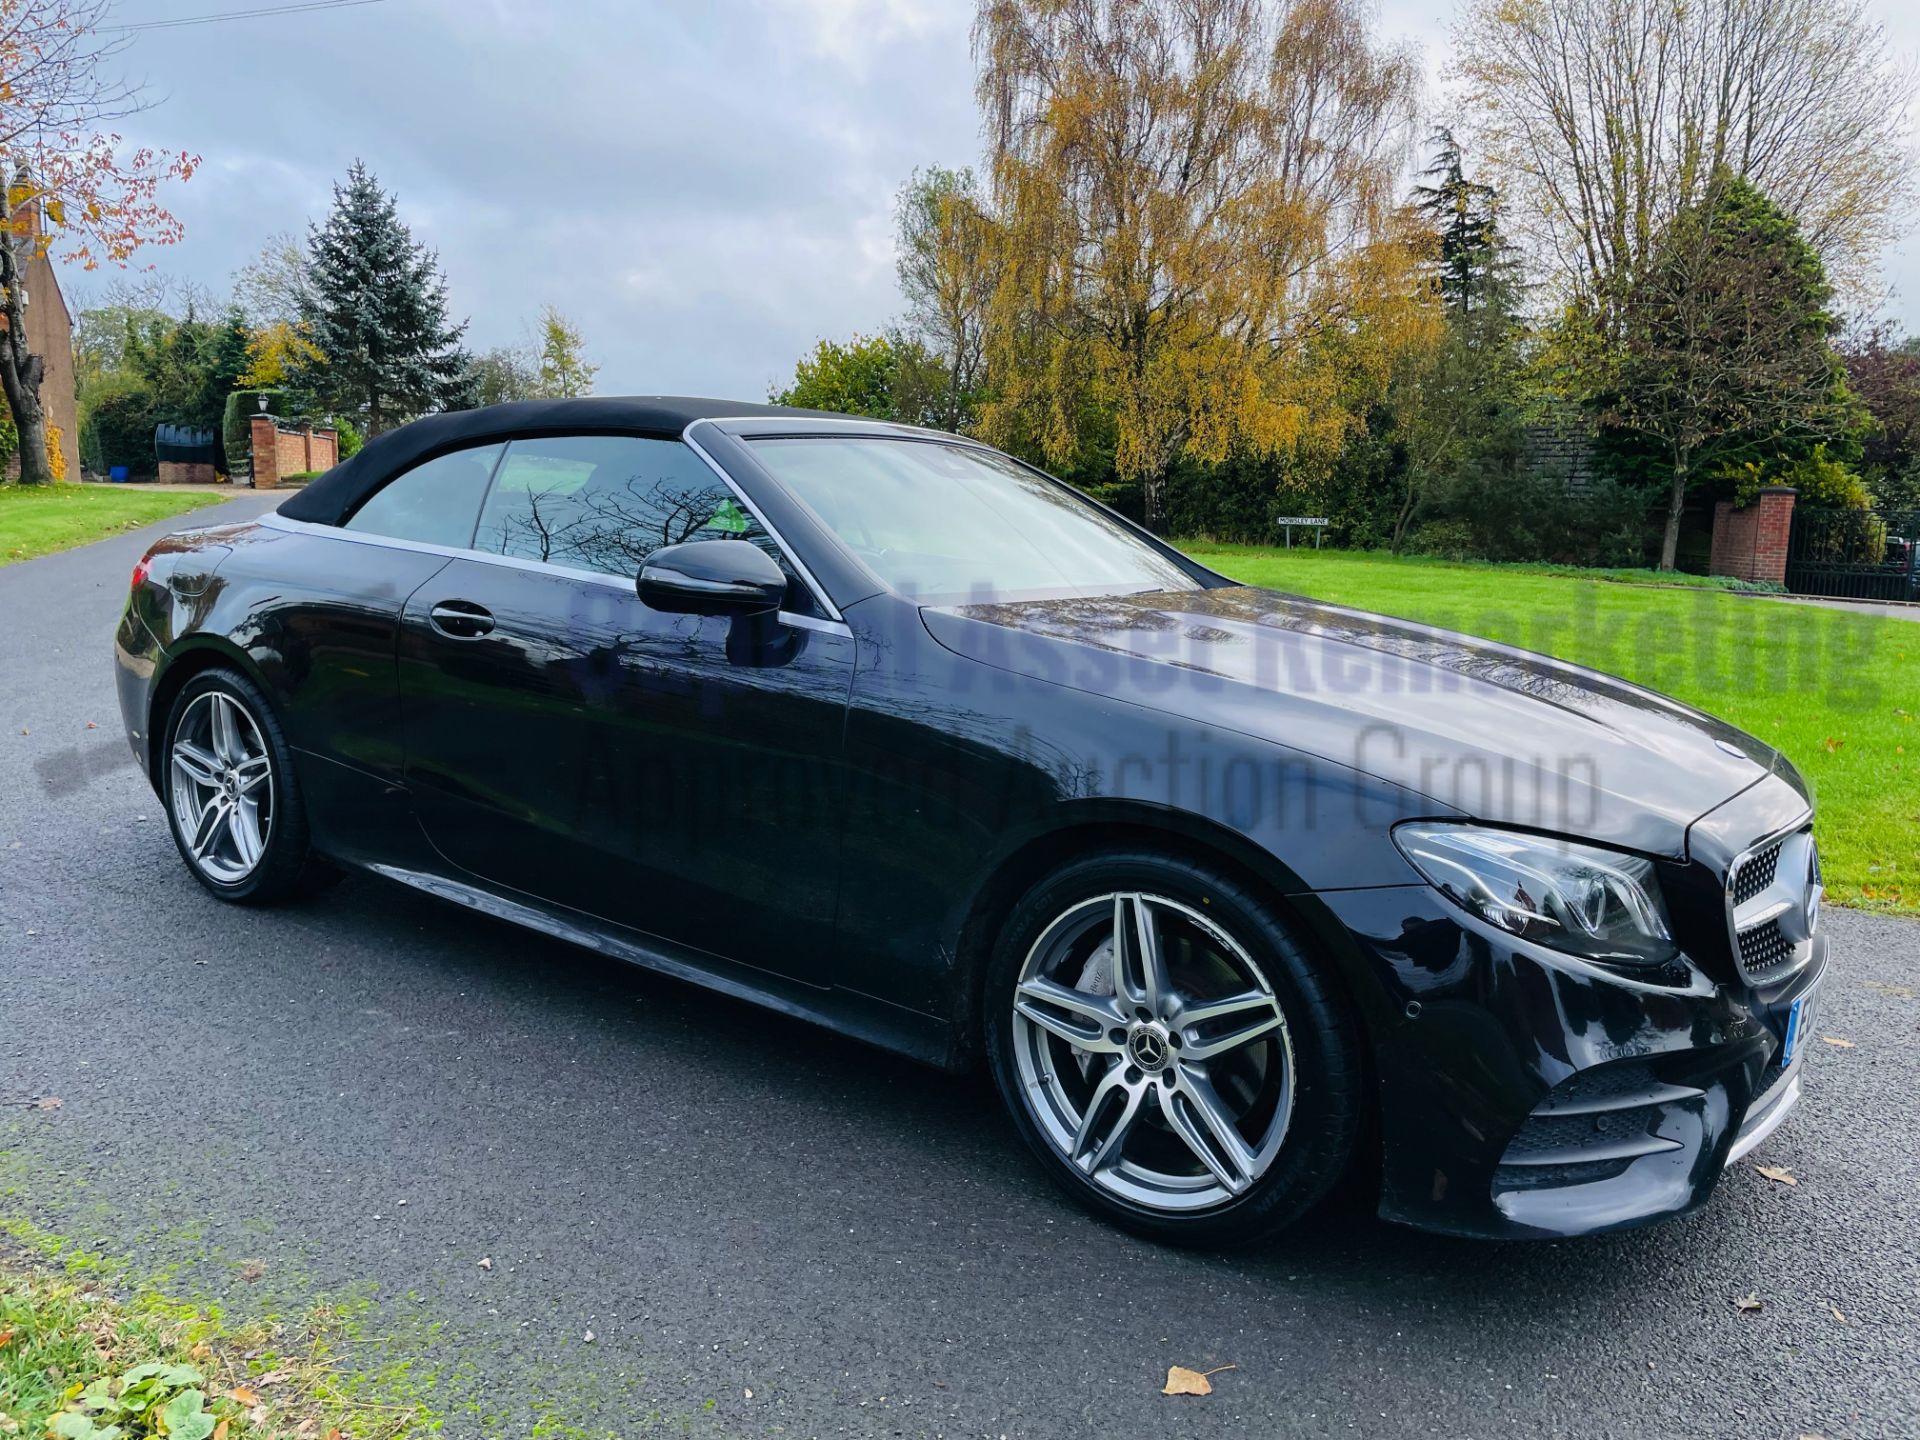 MERCEDES-BENZ E220D *AMG LINE - CABRIOLET* (2019 - EURO 6) '9G TRONIC AUTO - SAT NAV' *FULLY LOADED* - Image 2 of 66